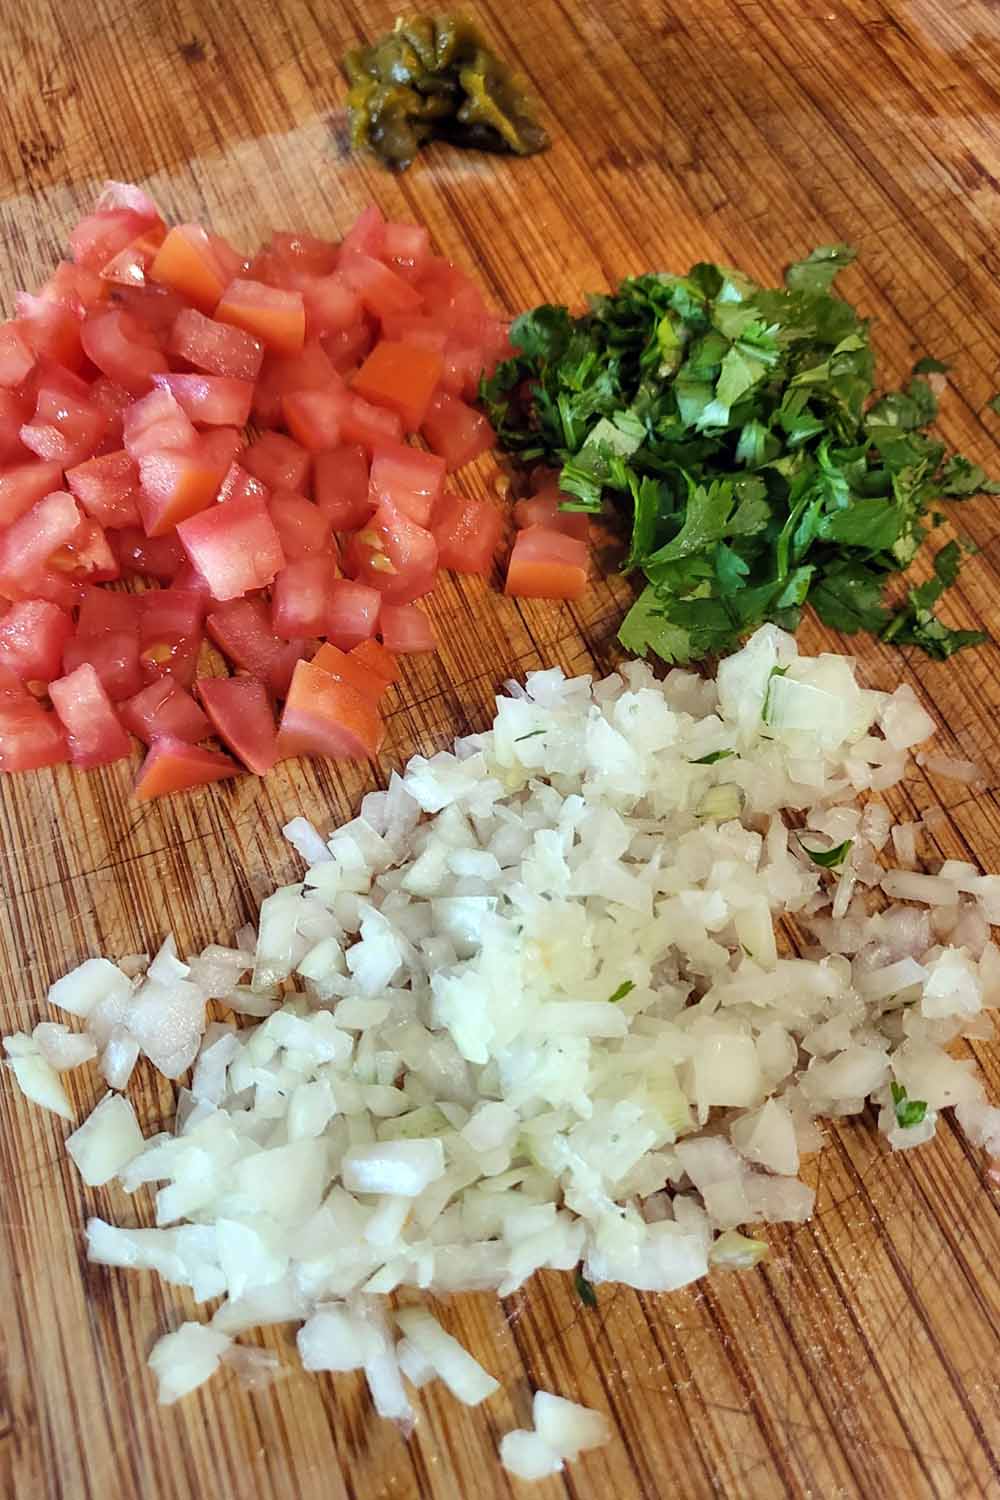 Cutting board with chopped onion, tomato, cilantro, and green chiles.